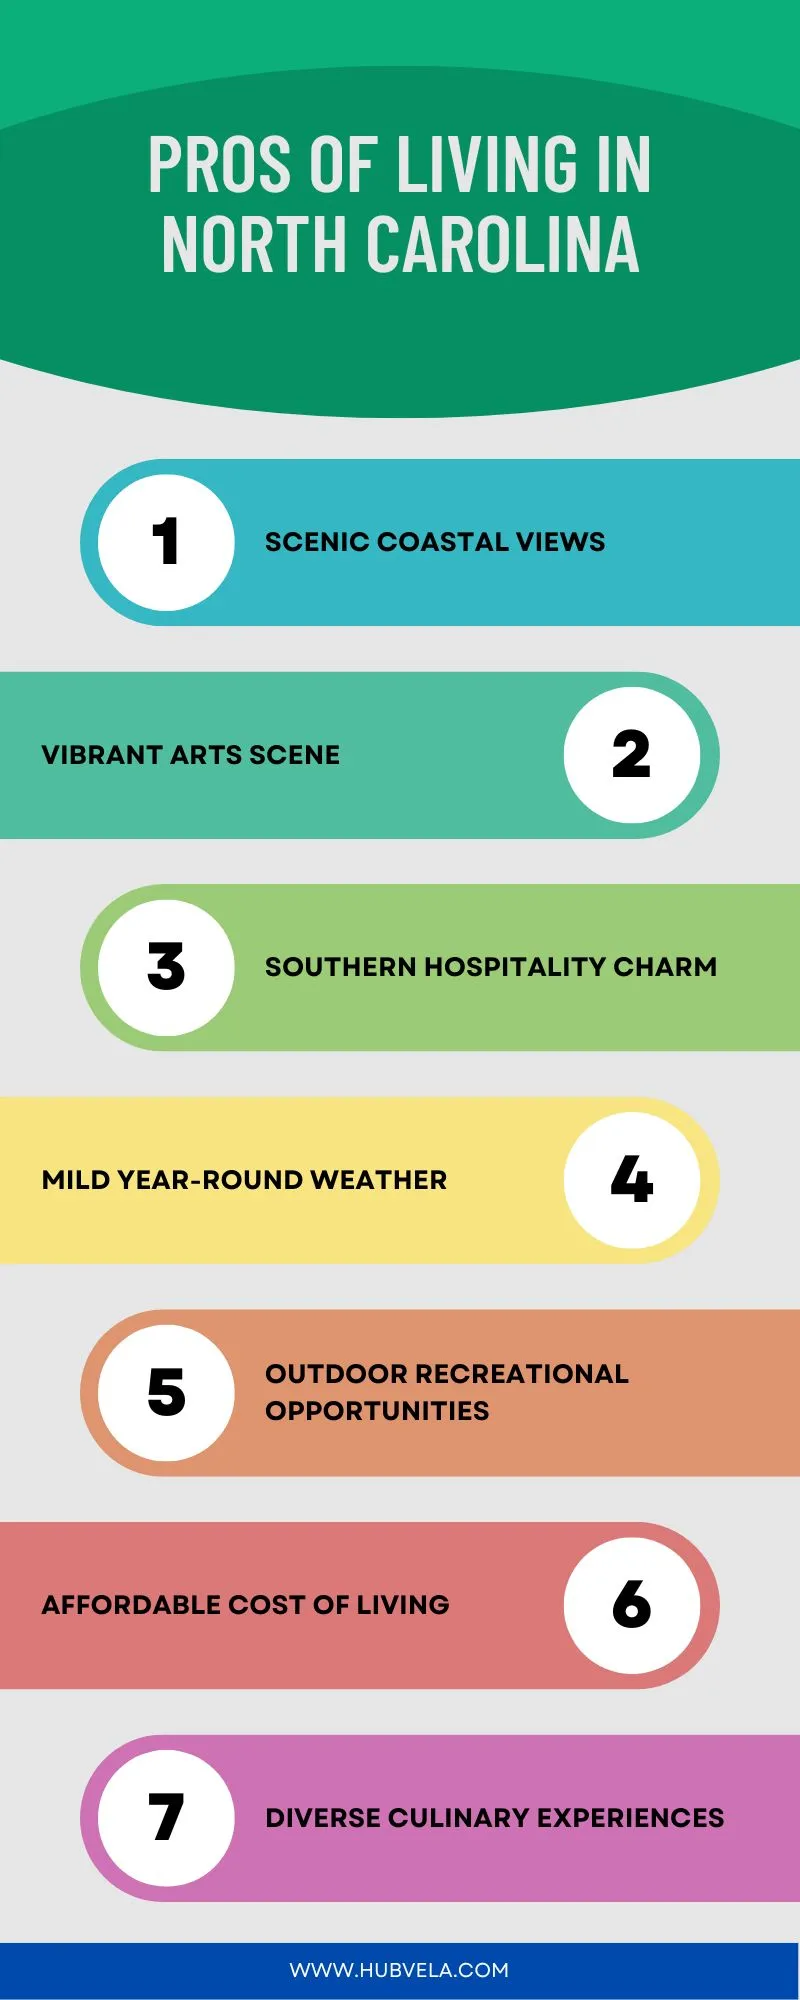 Pros of Living in North Carolina Infographic